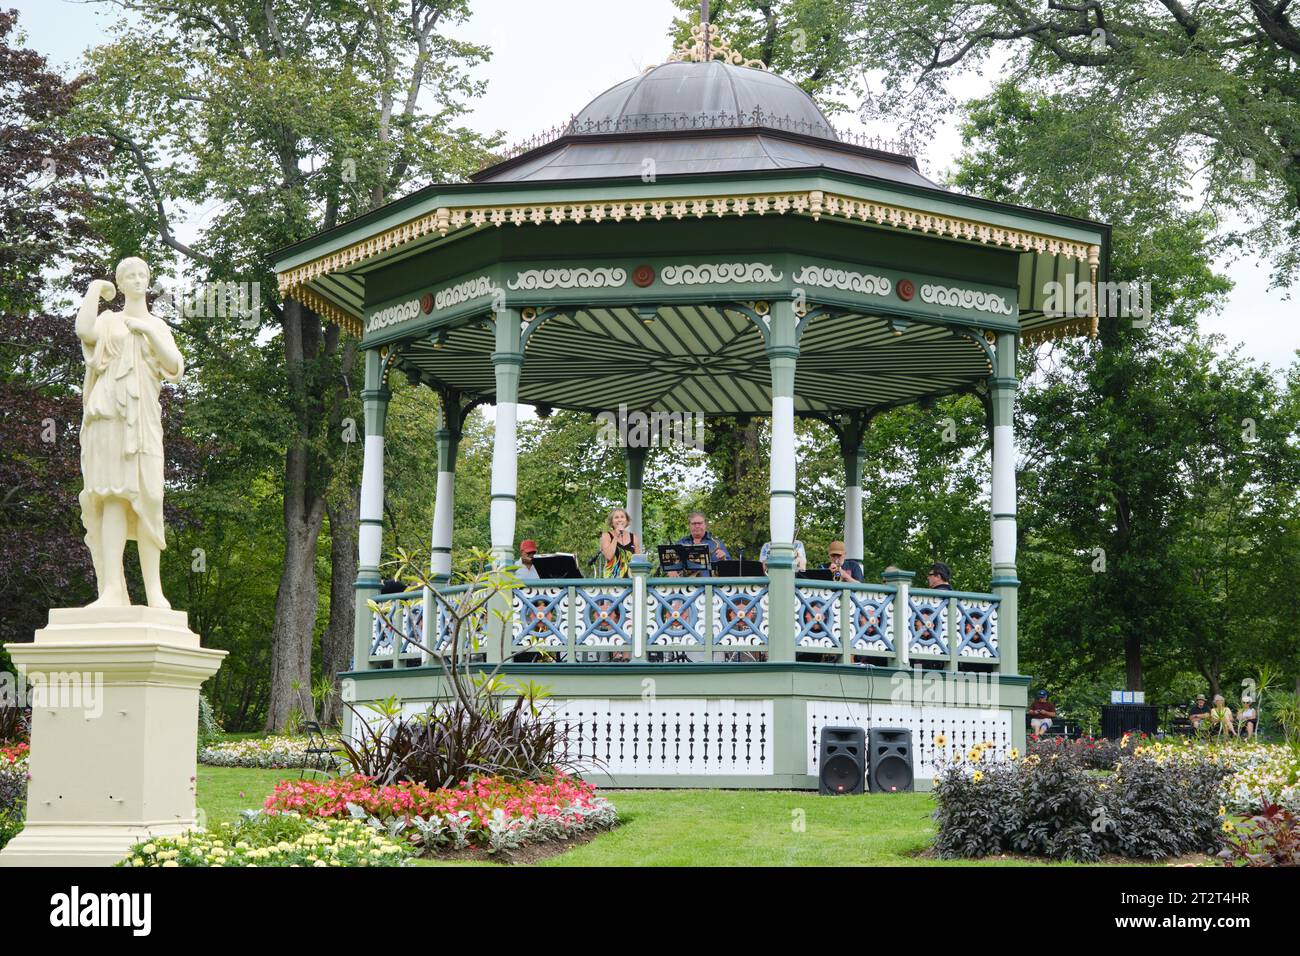 band playing concert in Gazebo of Halifax Public Gardens Stock Photo